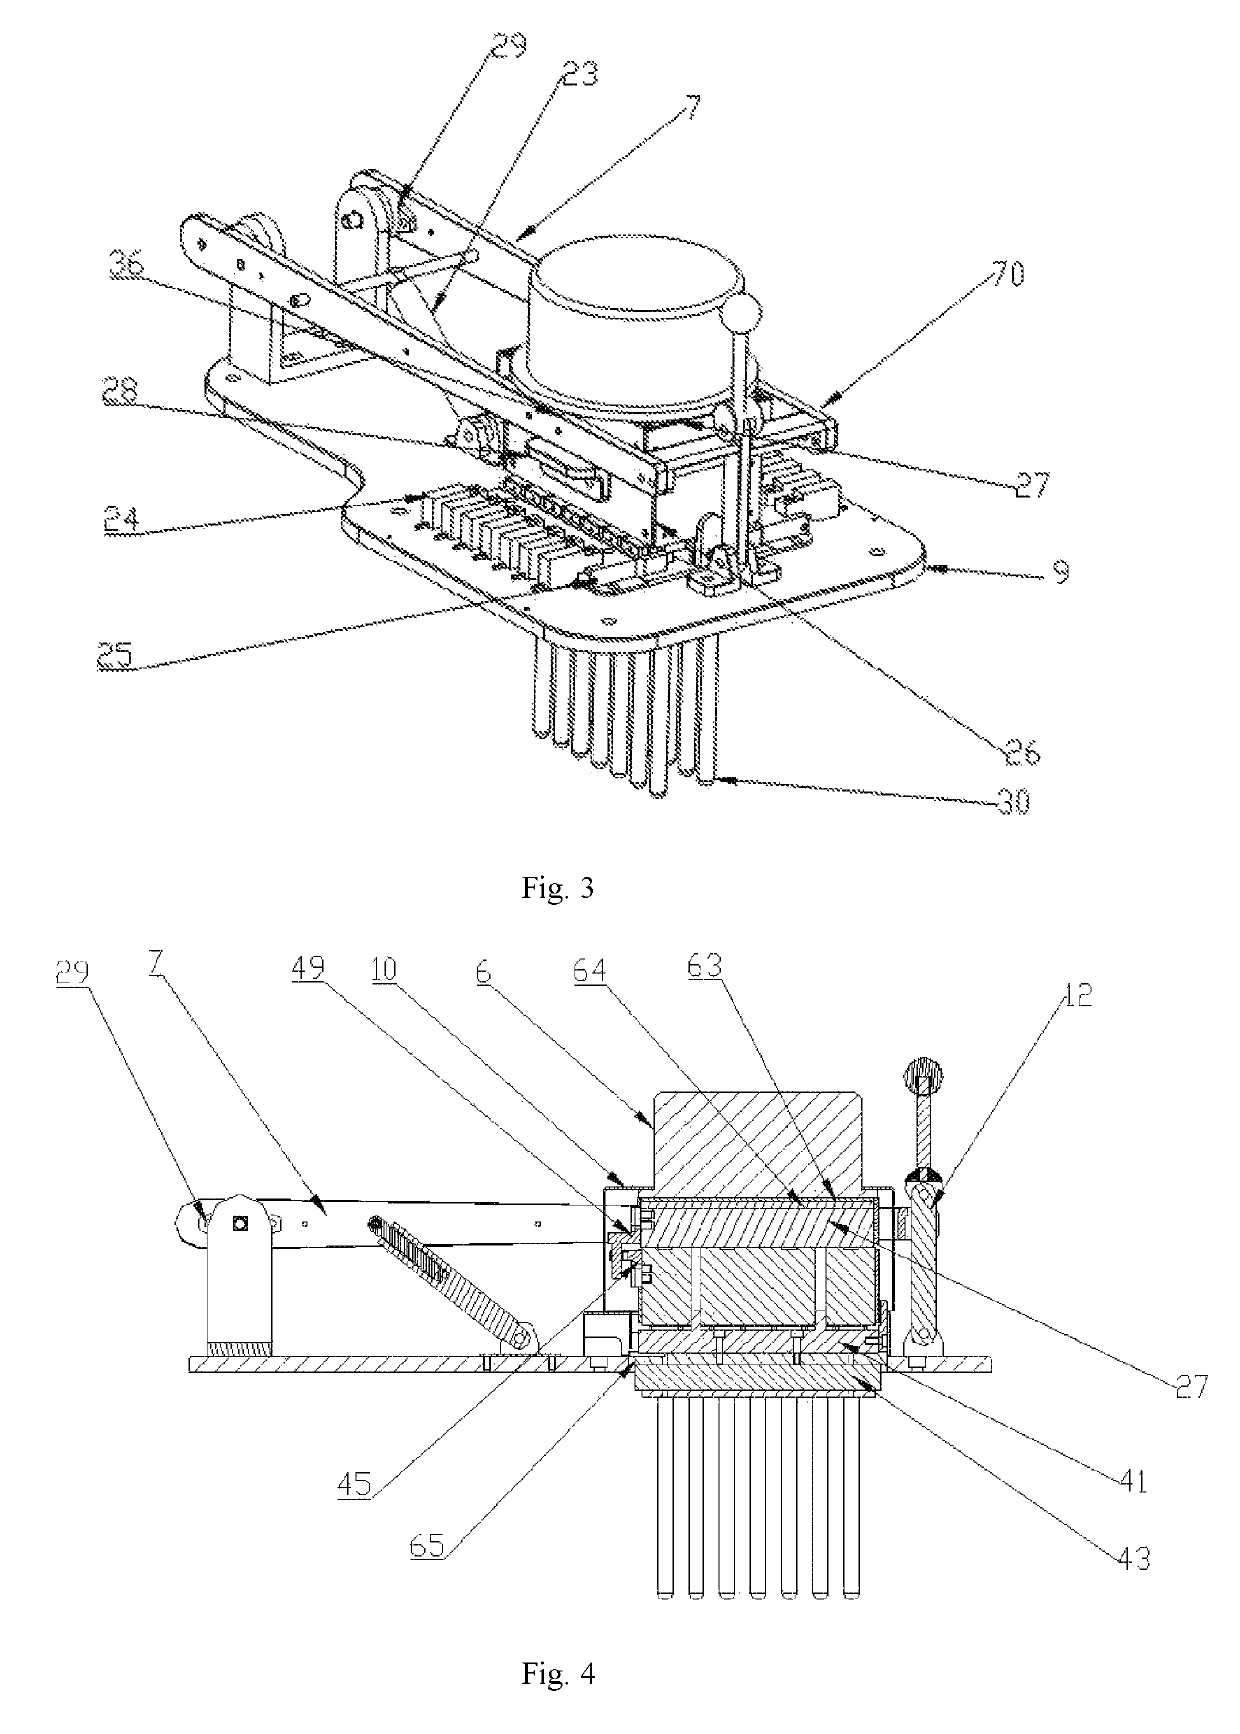 Apparatus for full-automatic, ultra-low pressure, fractionation-free and non-destructive extraction of water